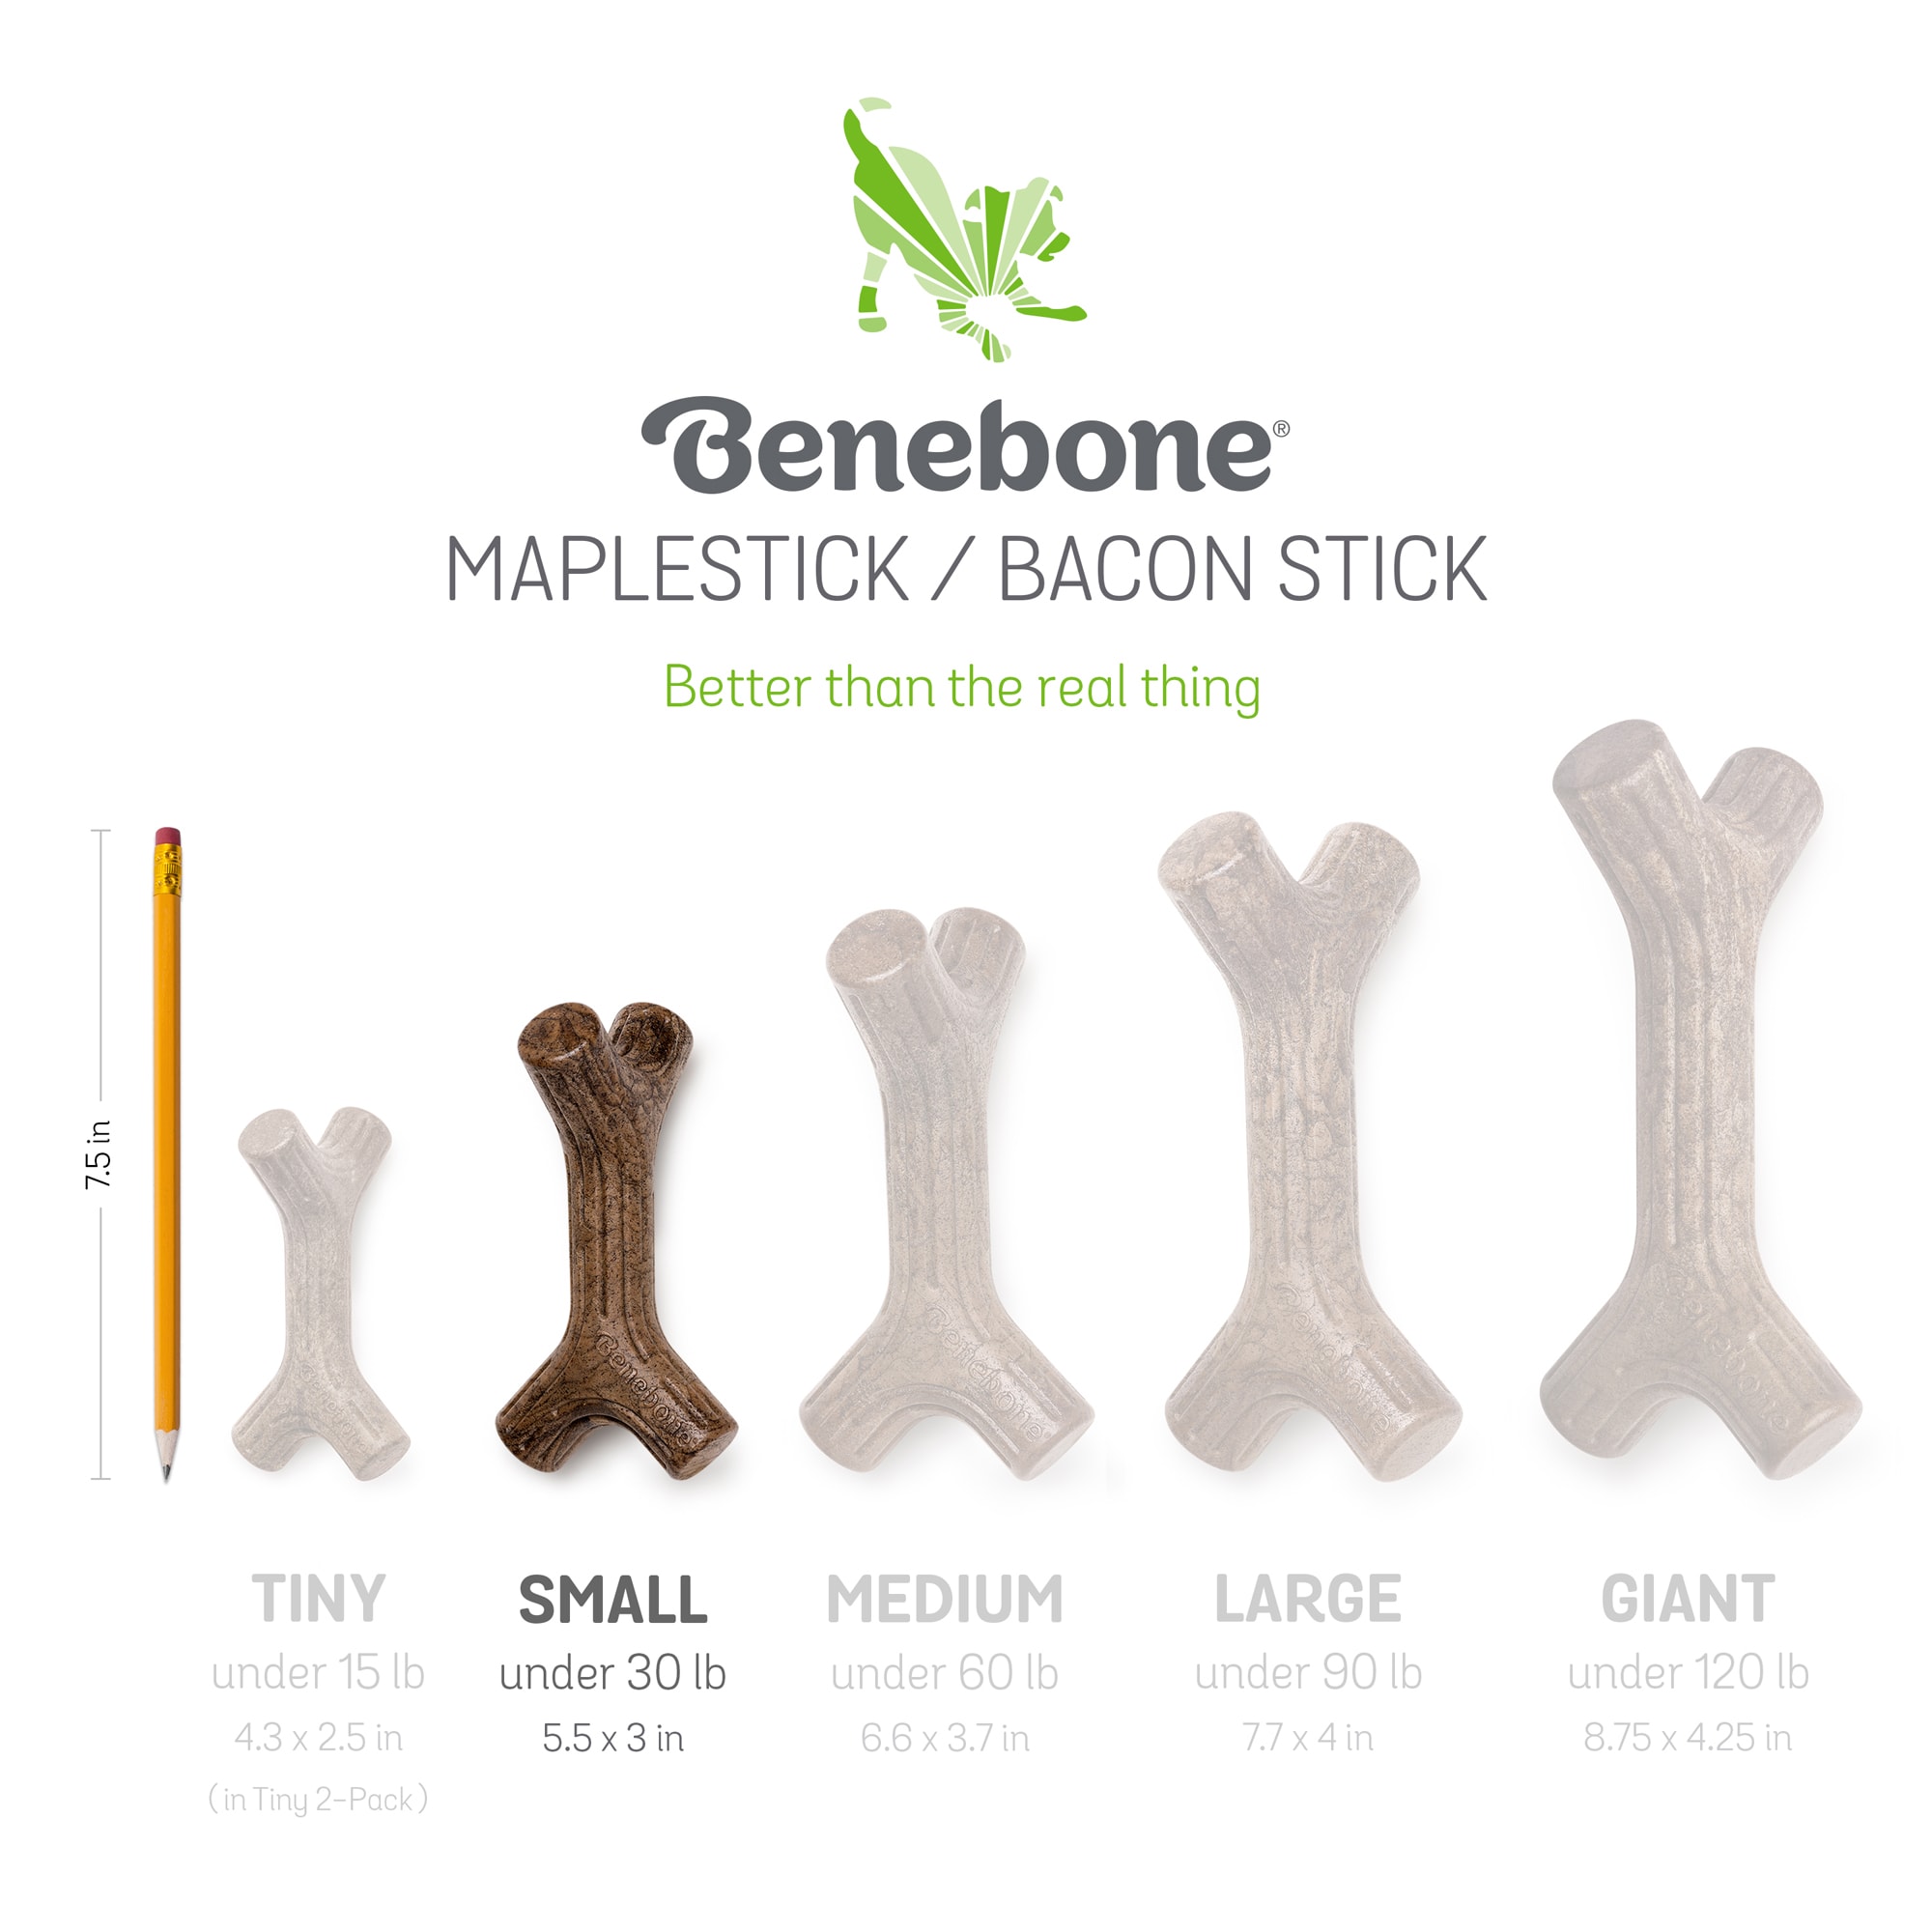 Benebone Maplestick/Bacon Stick Durable Dog Stick Chew Toy Made in USA 